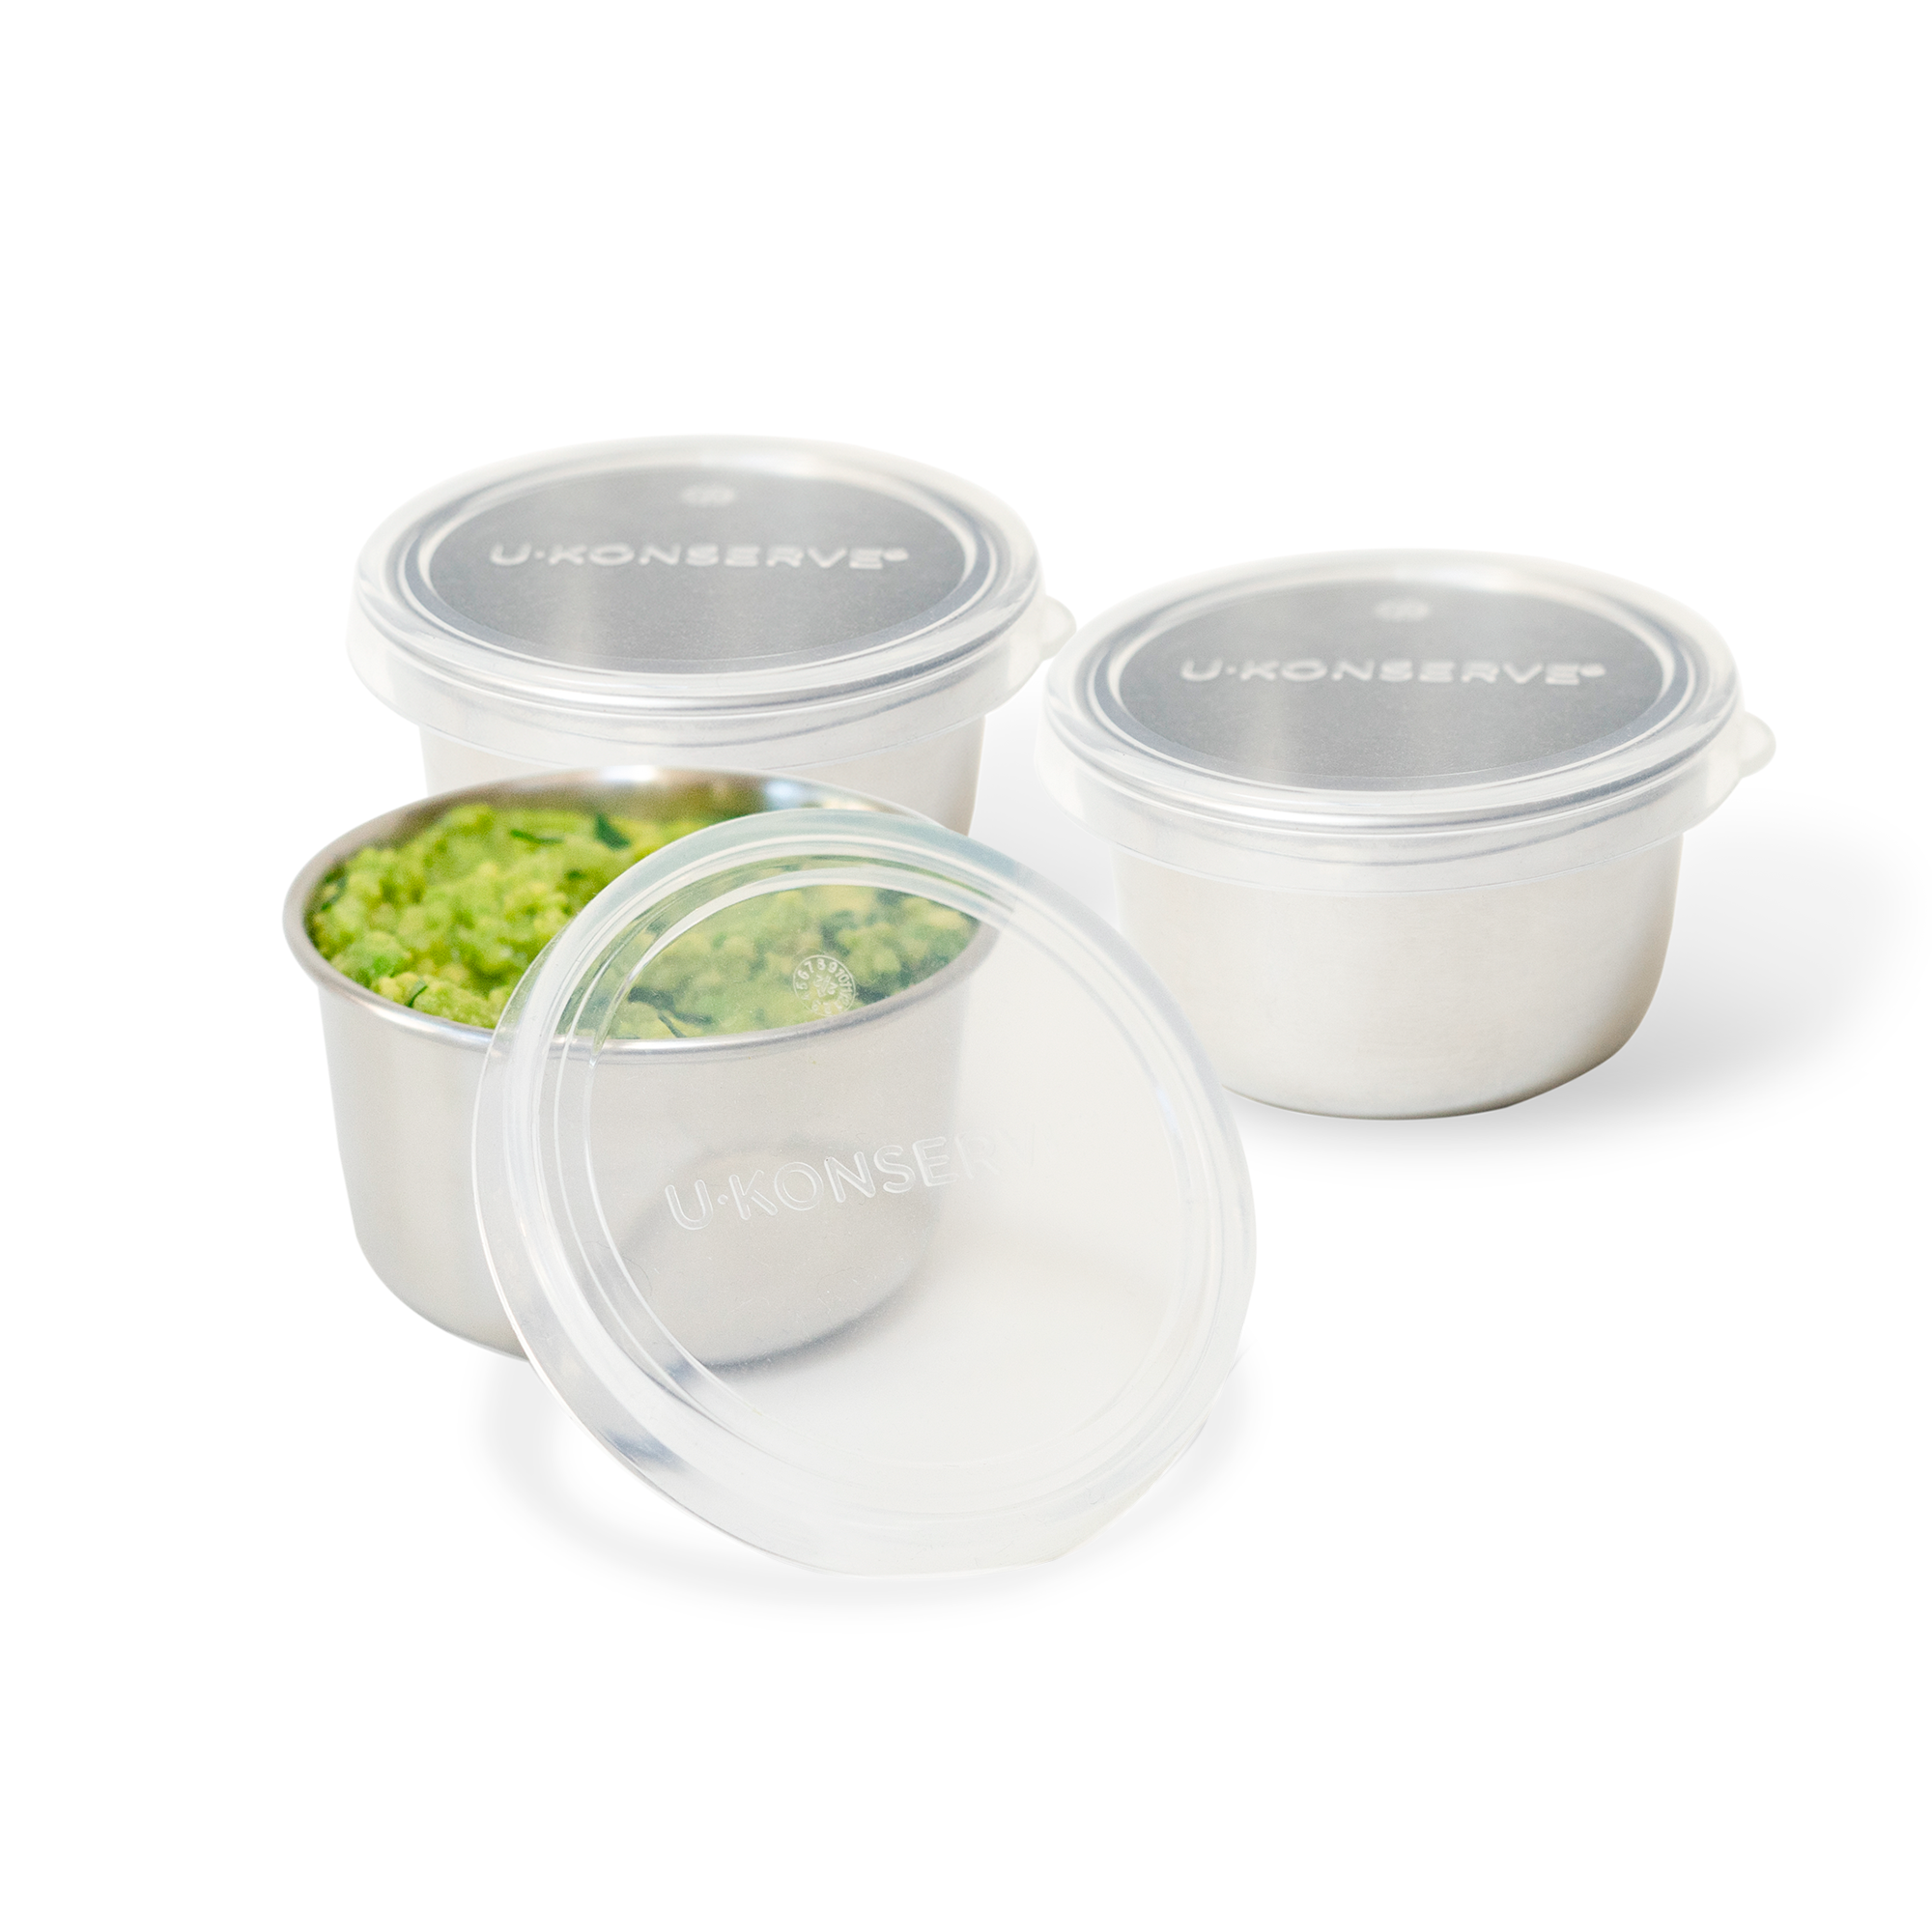 U Konserve Big Mini Stainless Steel Container, 7 oz - Foods Co.